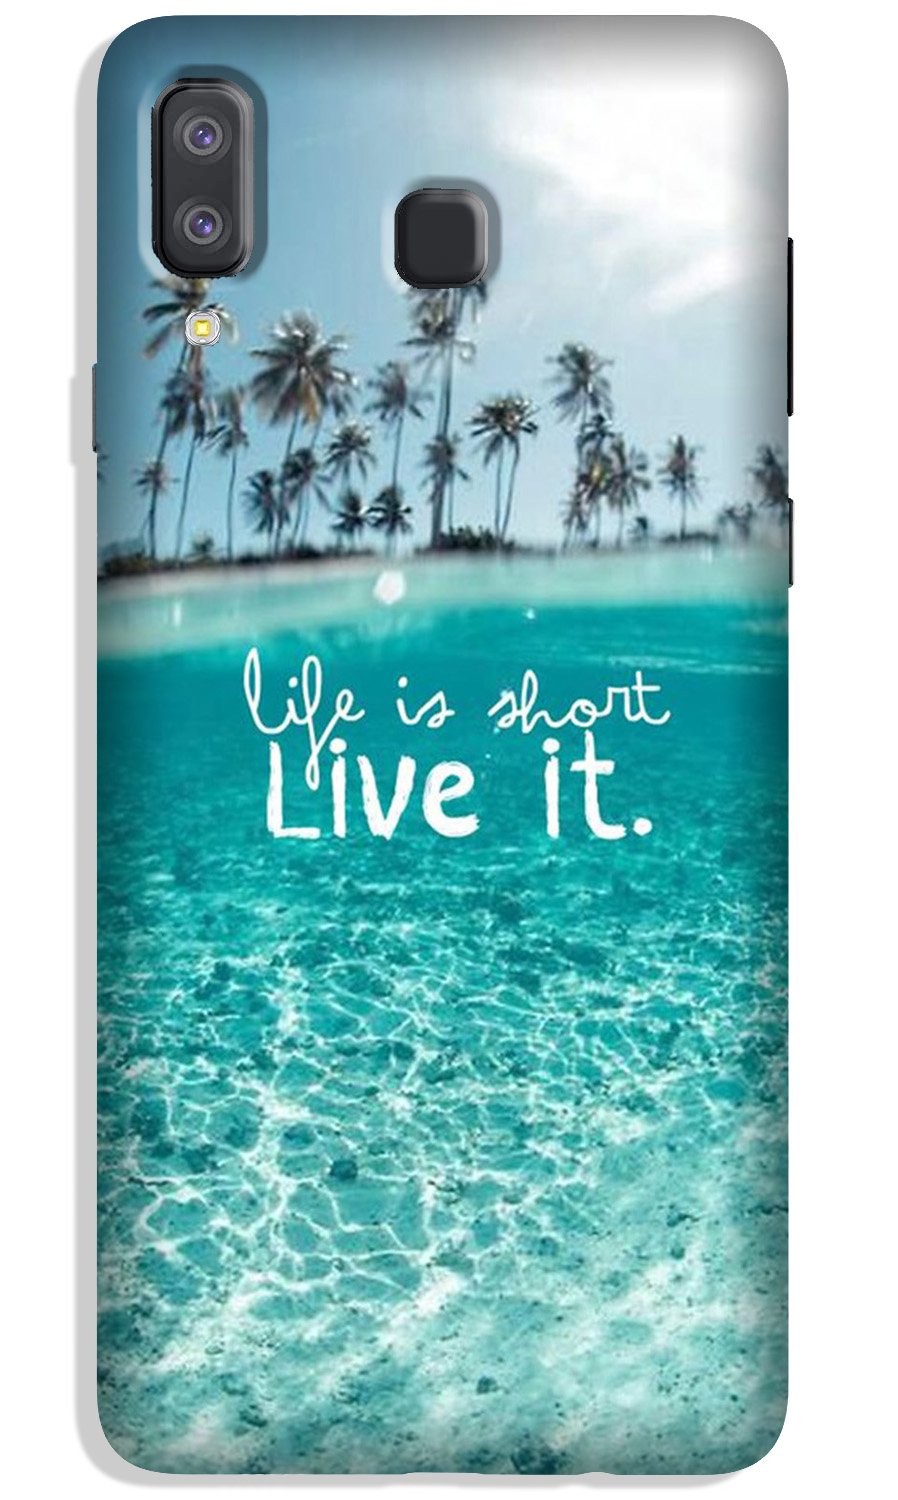 Life is short live it Case for Galaxy A8 Star